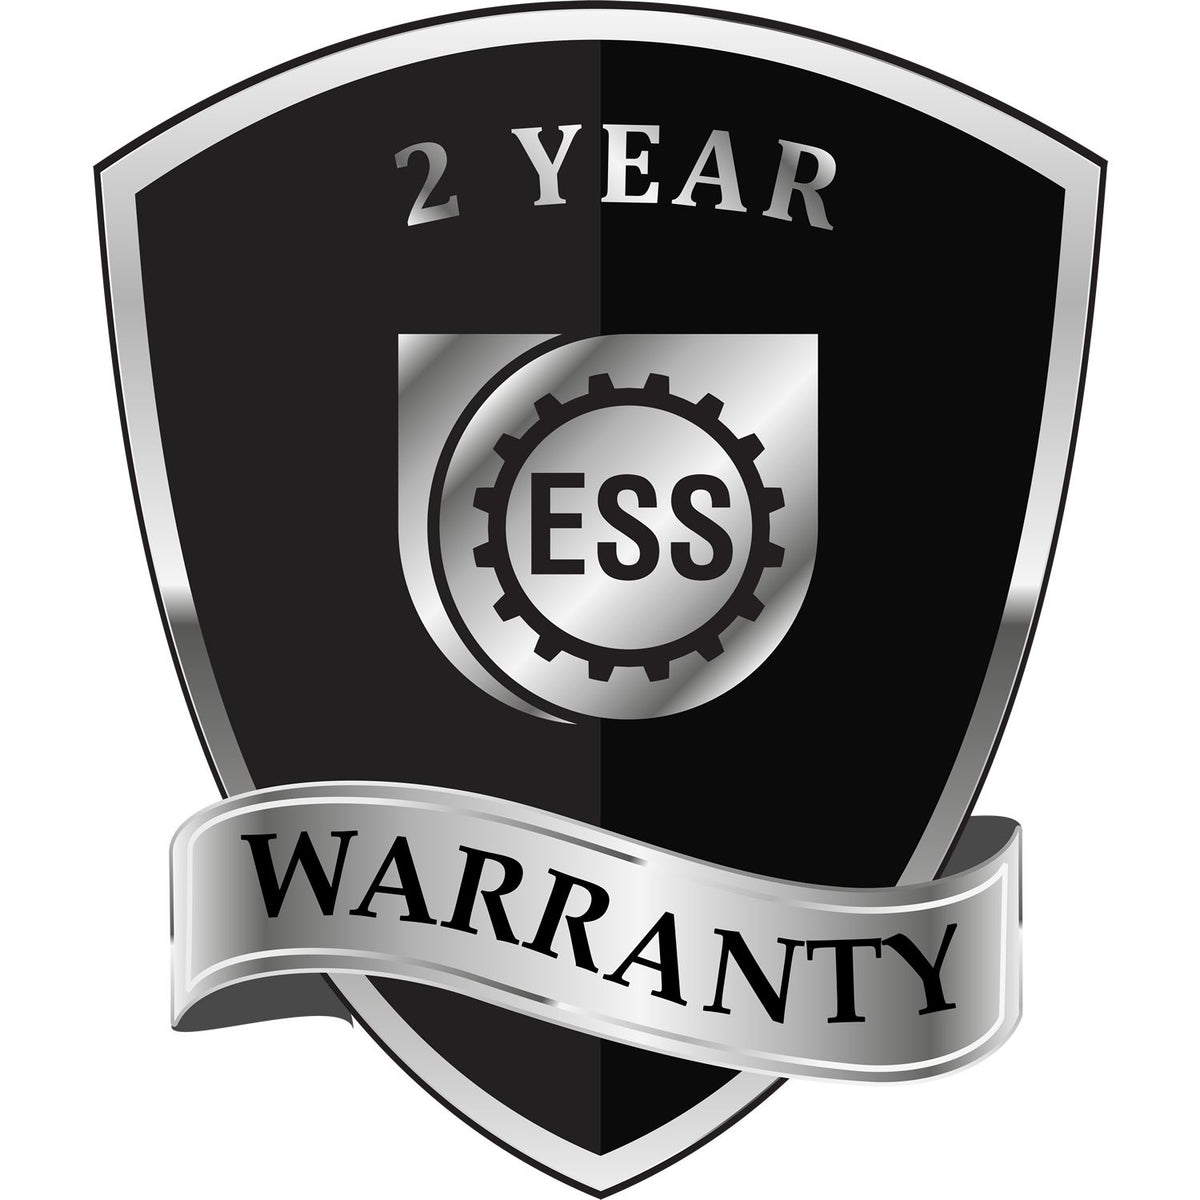 A black and silver badge or emblem showing warranty information for the Long Reach South Carolina Geology Seal